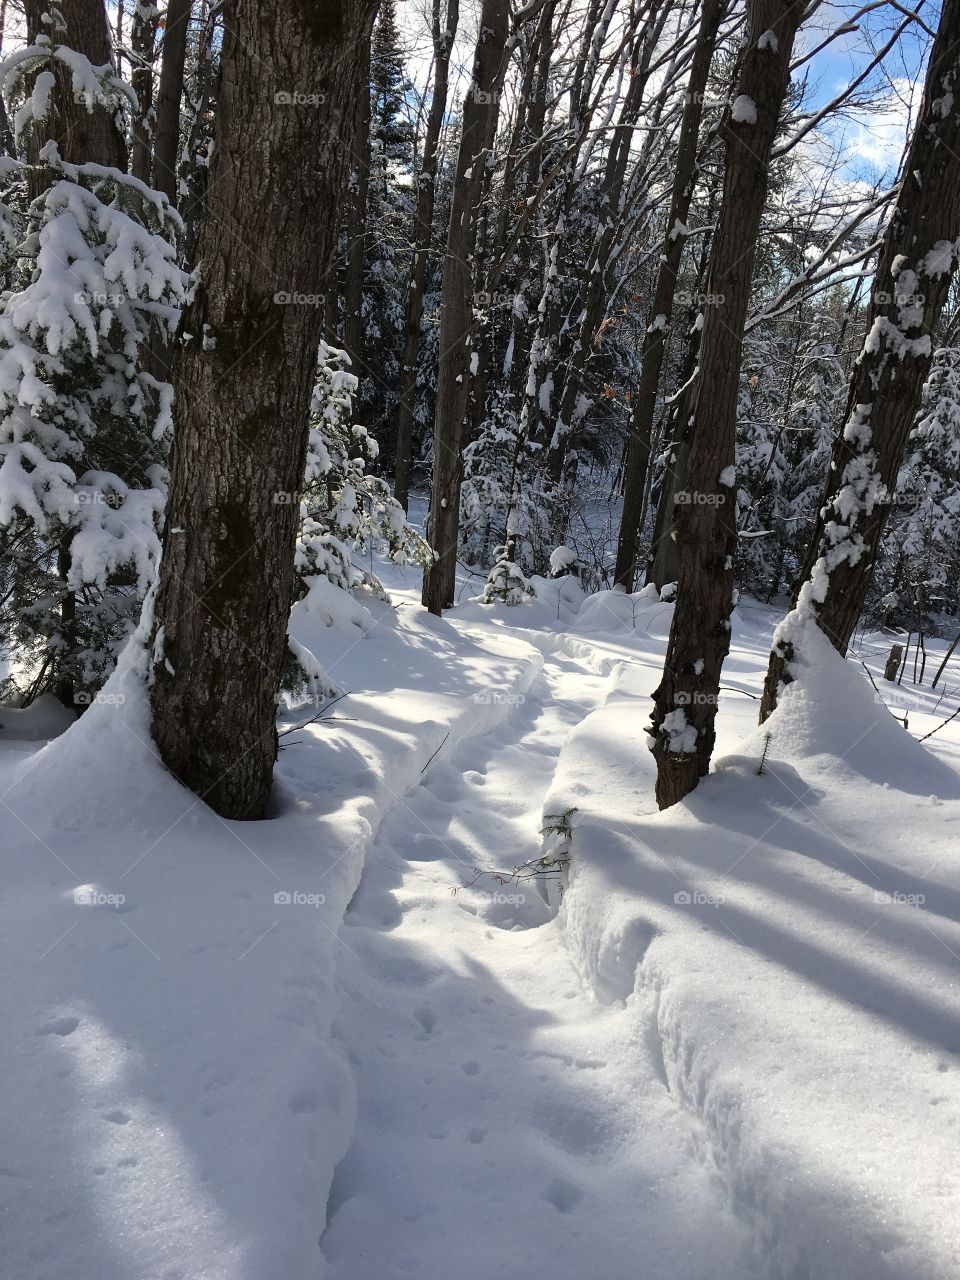 snowshoe trail in north bay in my back yard